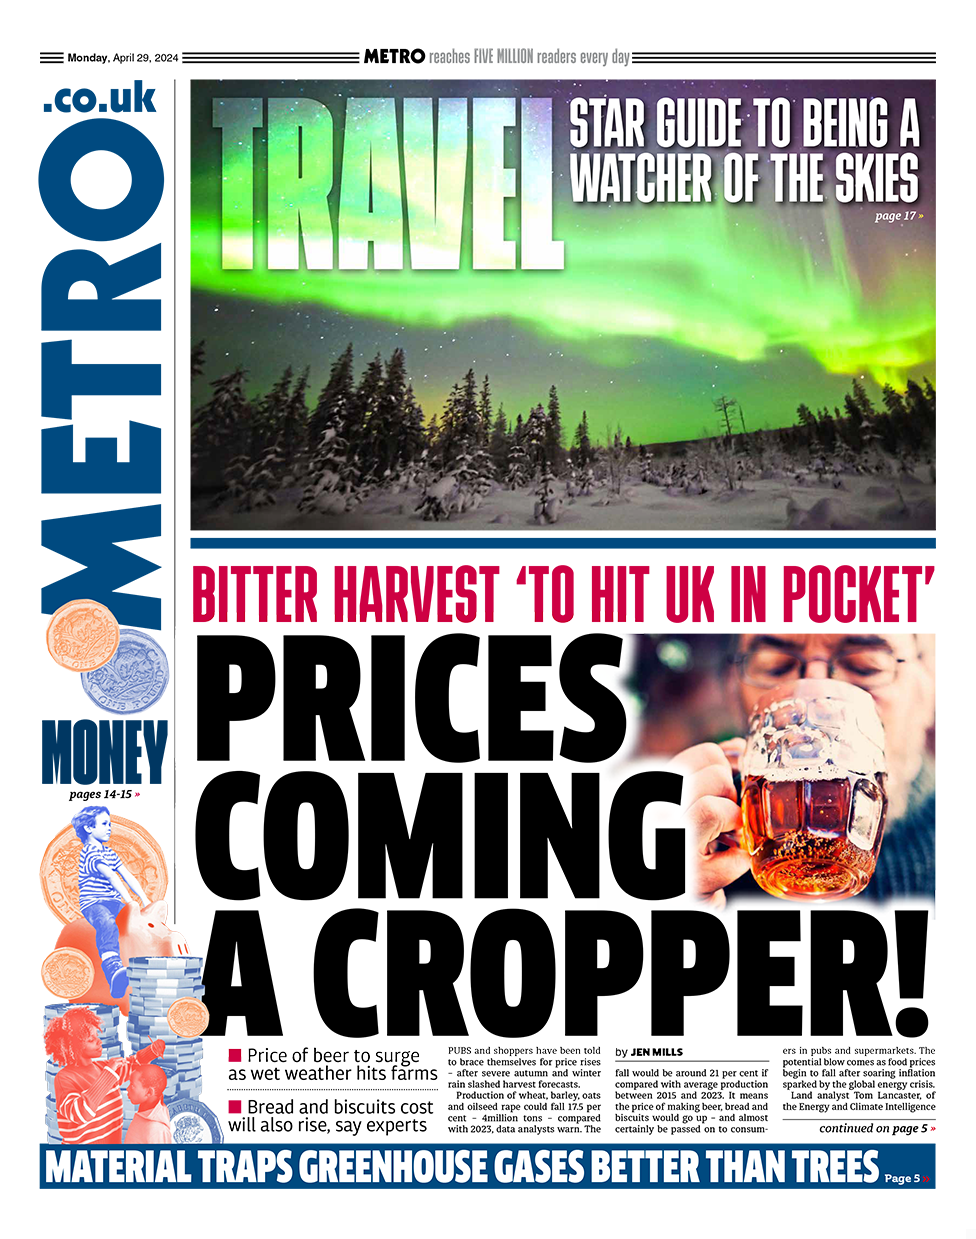 The headline in the Metro reads: "Prices coming a cropper!"